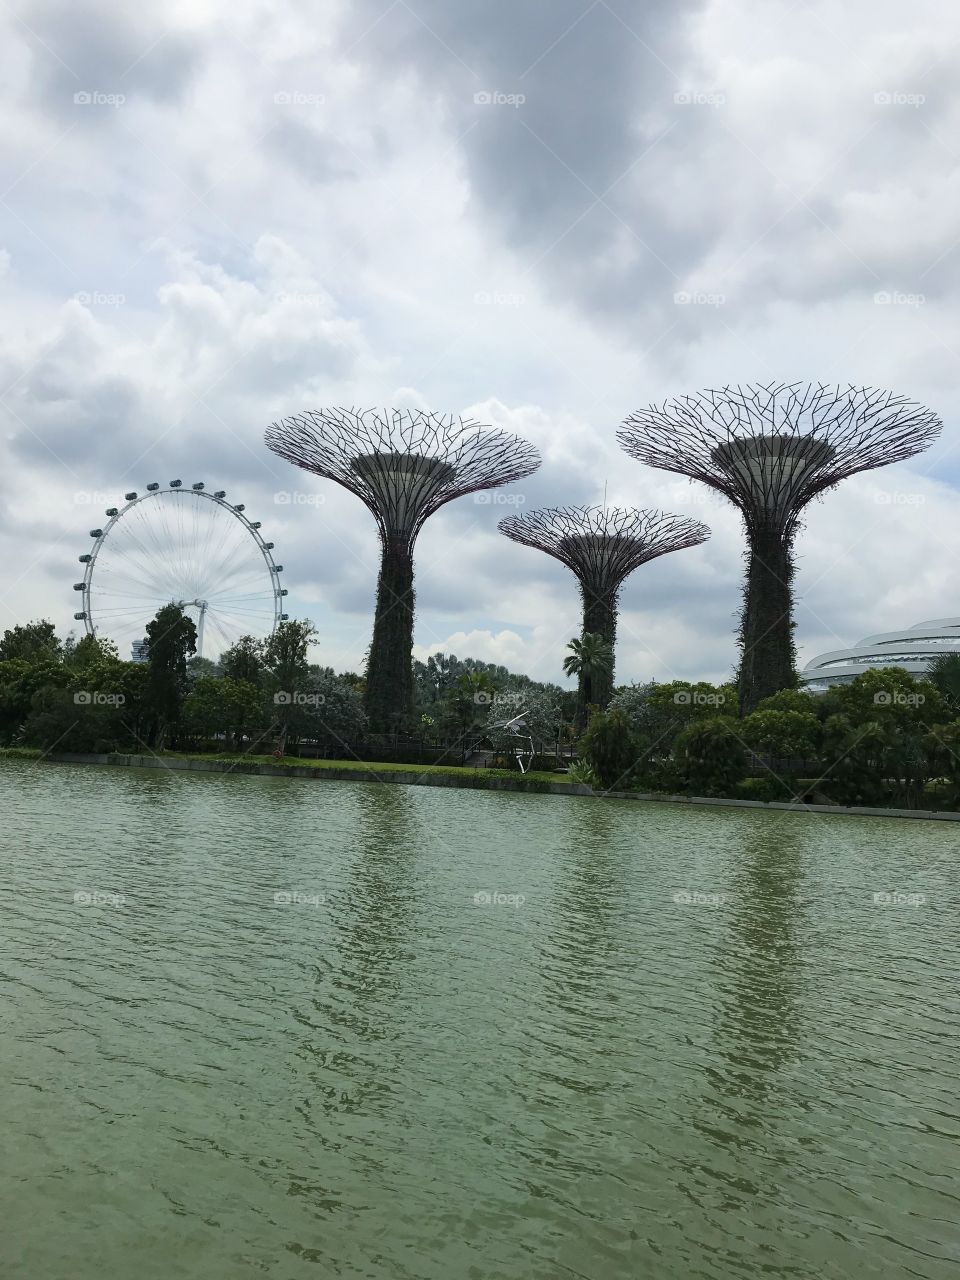 Gardens by the Bay in Singapore is an Institution of Public Character and registered charity under the Charities Act. The Gardens has a strong public service element as a national garden that presents wide-ranging floral displays